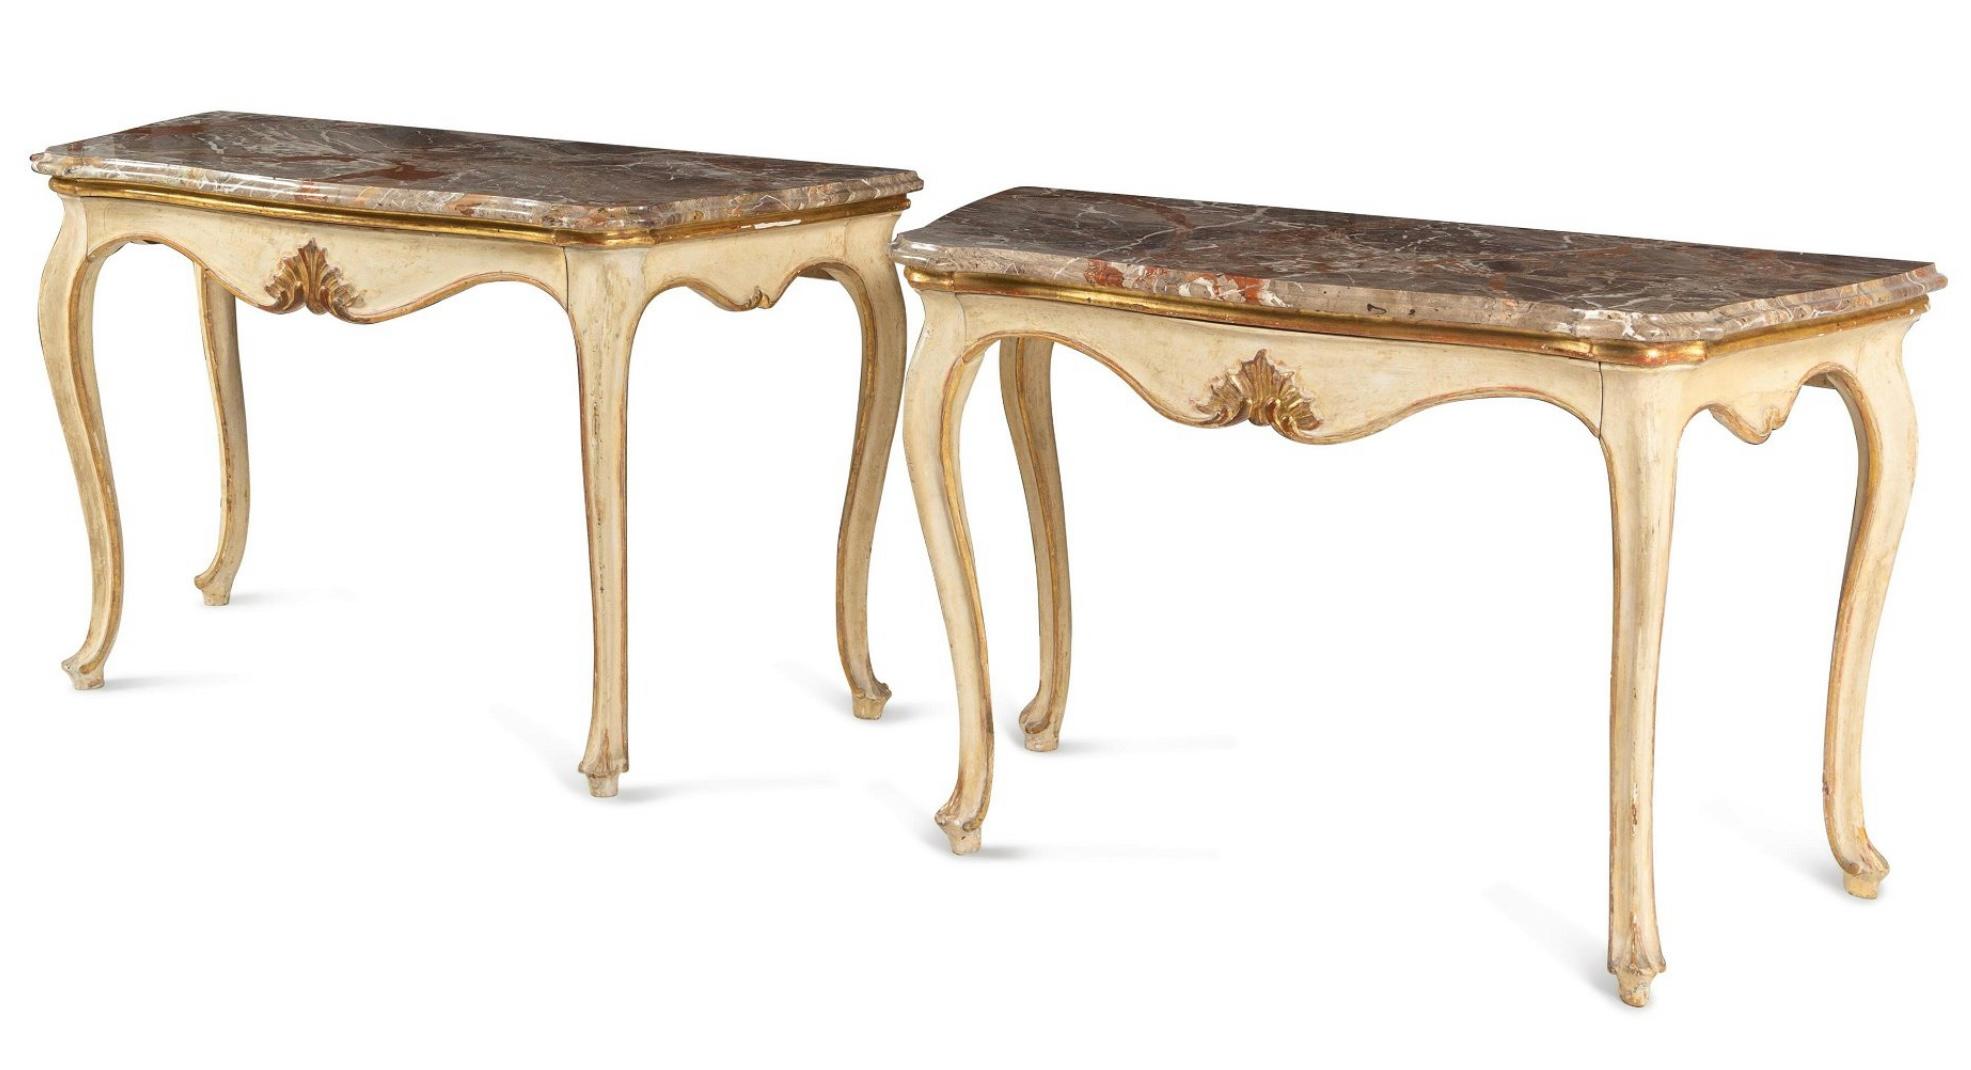 Fine pair of 19th century Italian rococo console tables, fine breche marble tops over scalloped sides and molded edge with carved gilt shell in center of aprons, which each have a single drawer. Original creamy paint and gold gilt highlights,